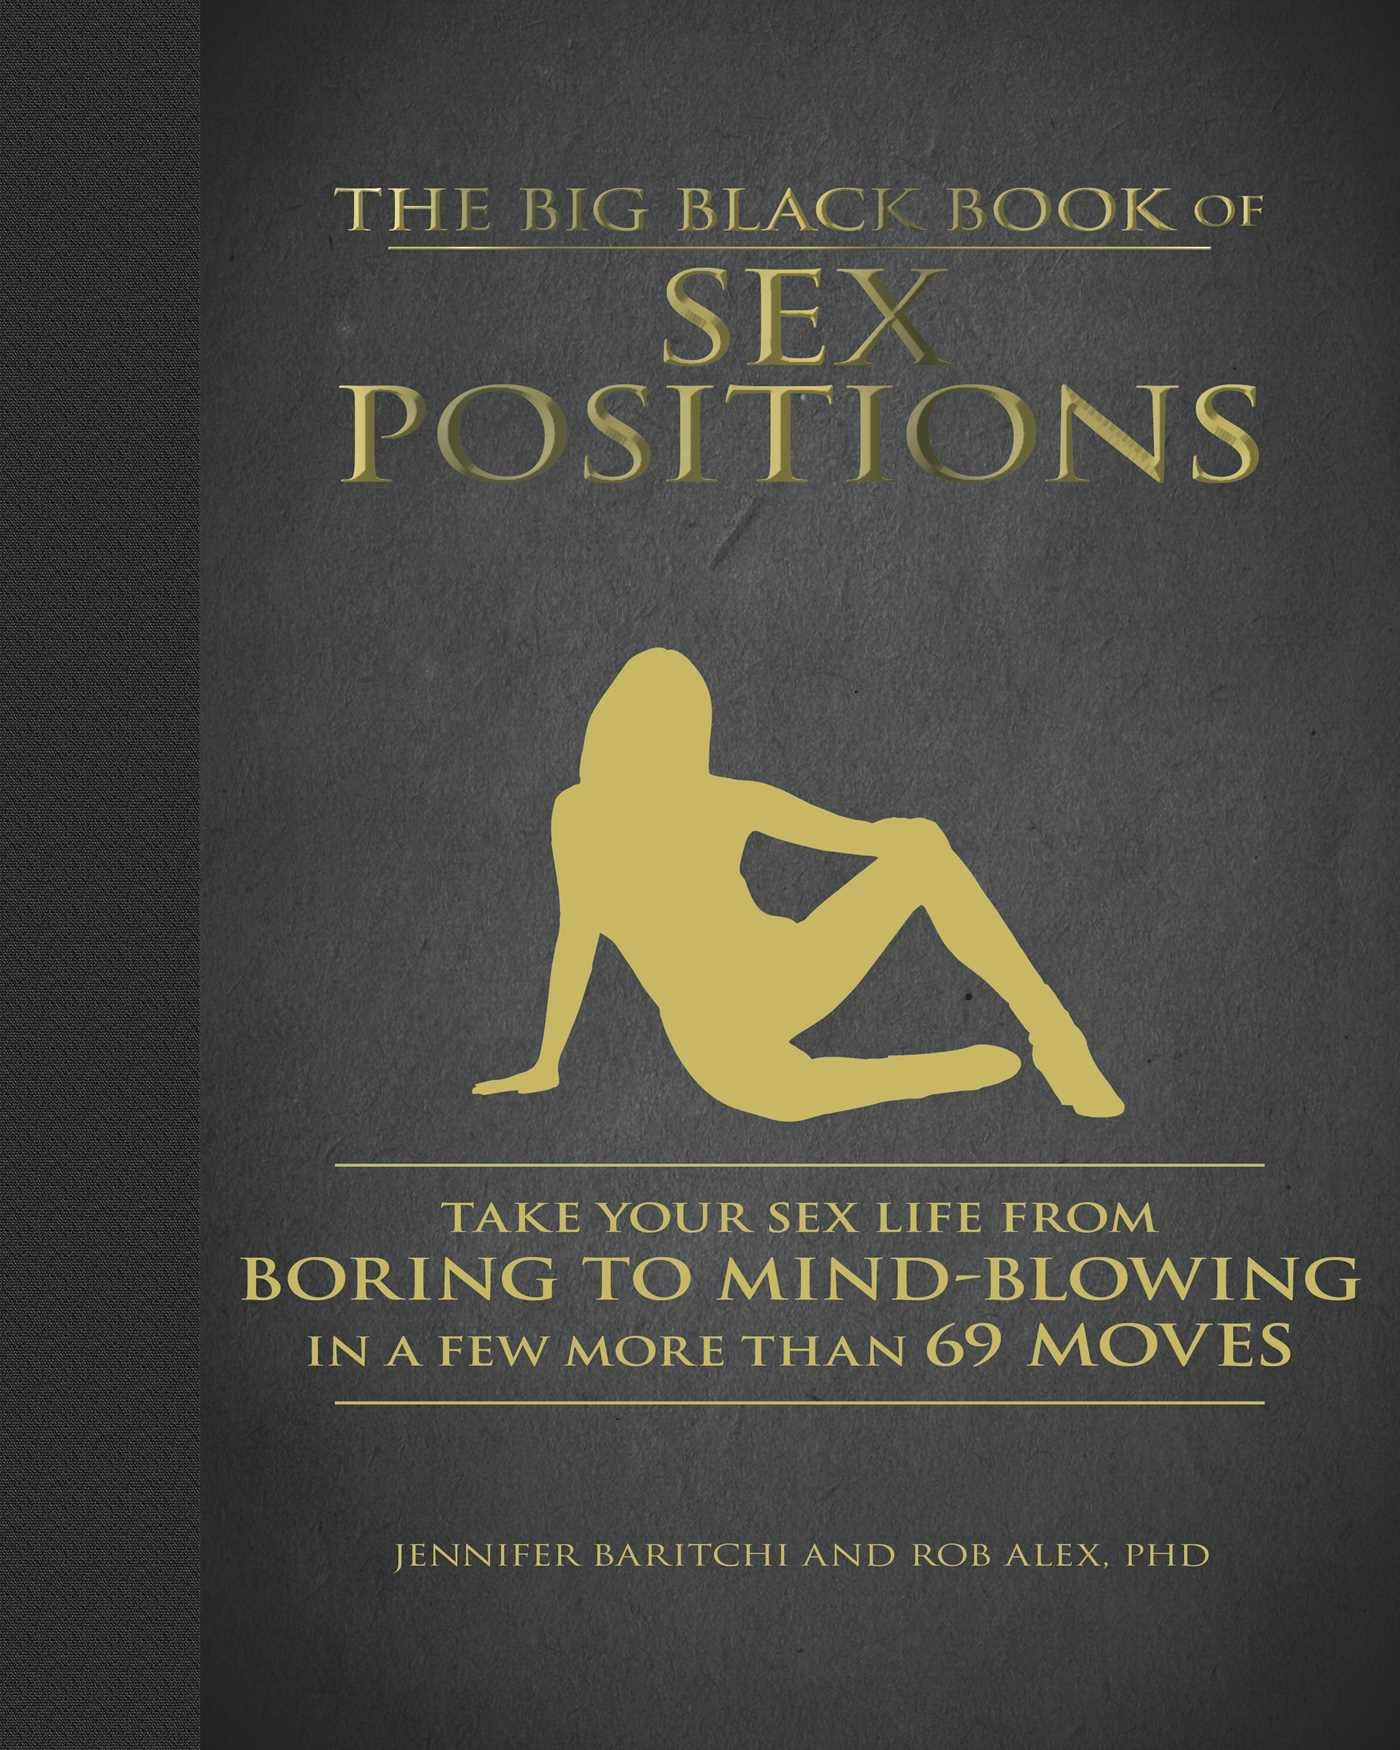 The Big Black Book of Sex Positions: Take Your Sex Life From Boring To Mind-Blowing in a Few More Than 69 Moves - Rob Alex, Jennifer Baritchi